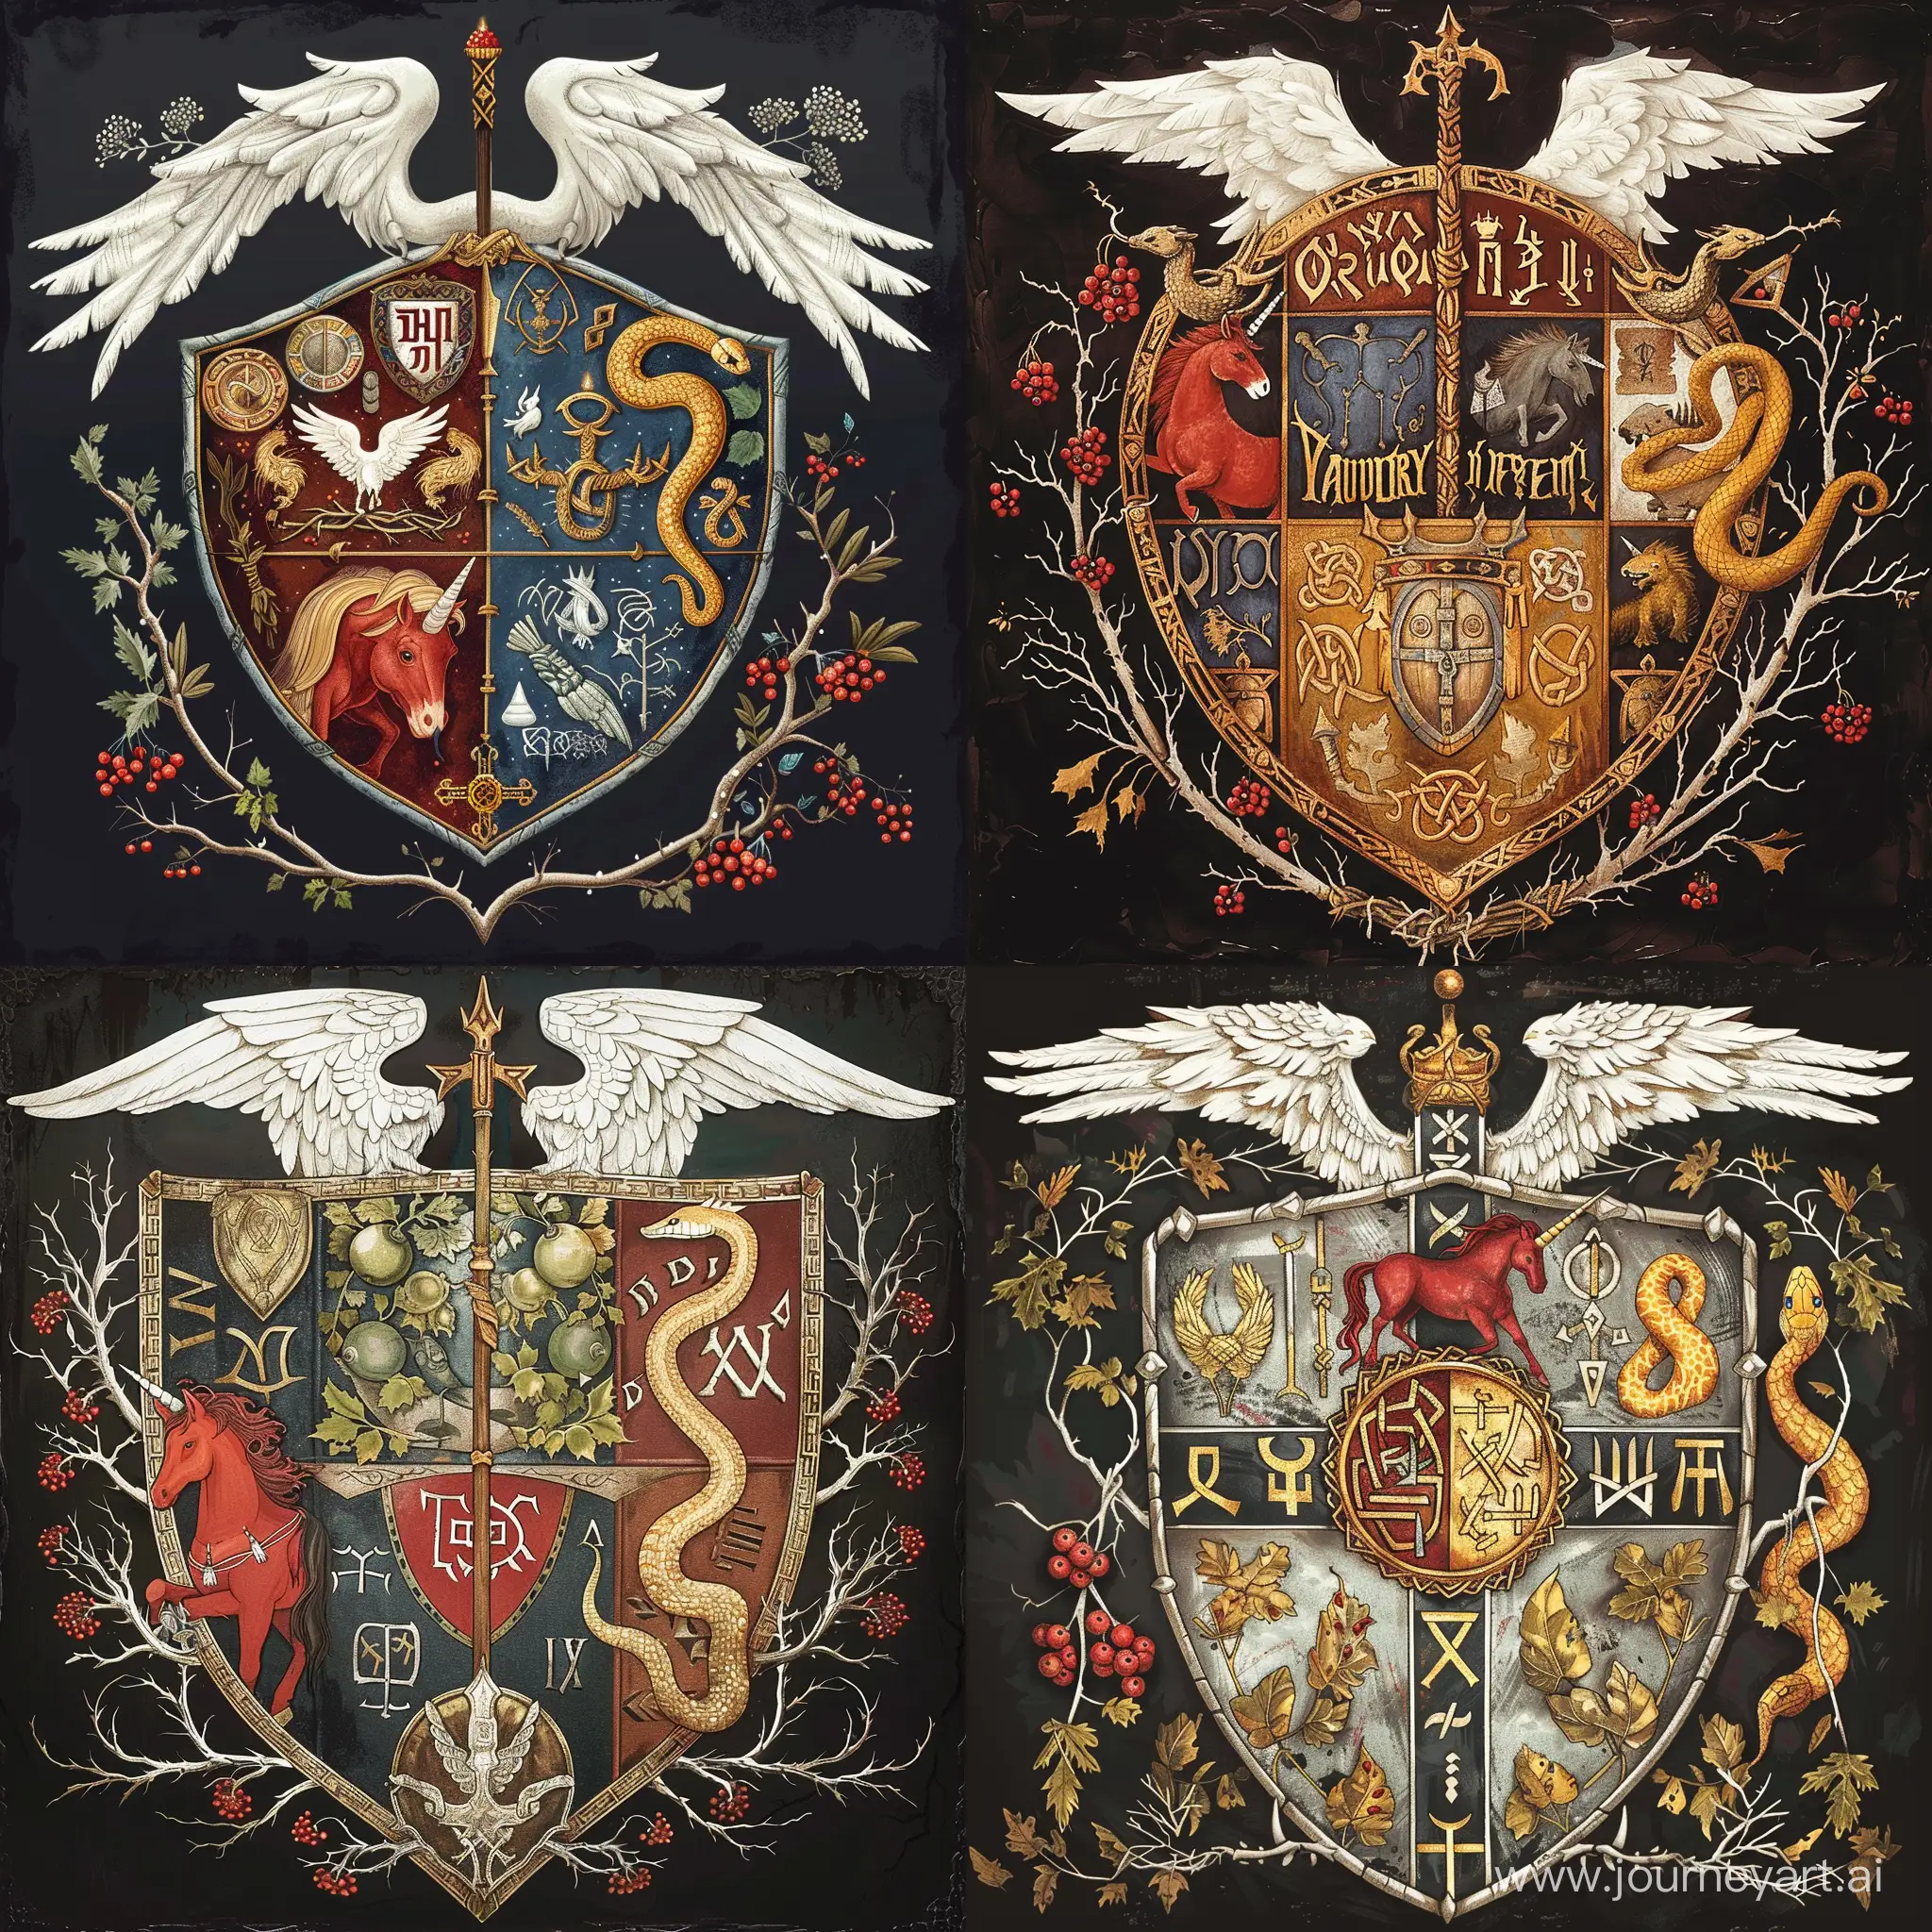 Coat of arms on the shield, Celtic heraldry, runes, a golden snake on the right, a druid staff in the middle of the shield, a red unicorn on the left, elderberry branches with berries at the top, thorn branches on the sides of the shield, white wings above the shield